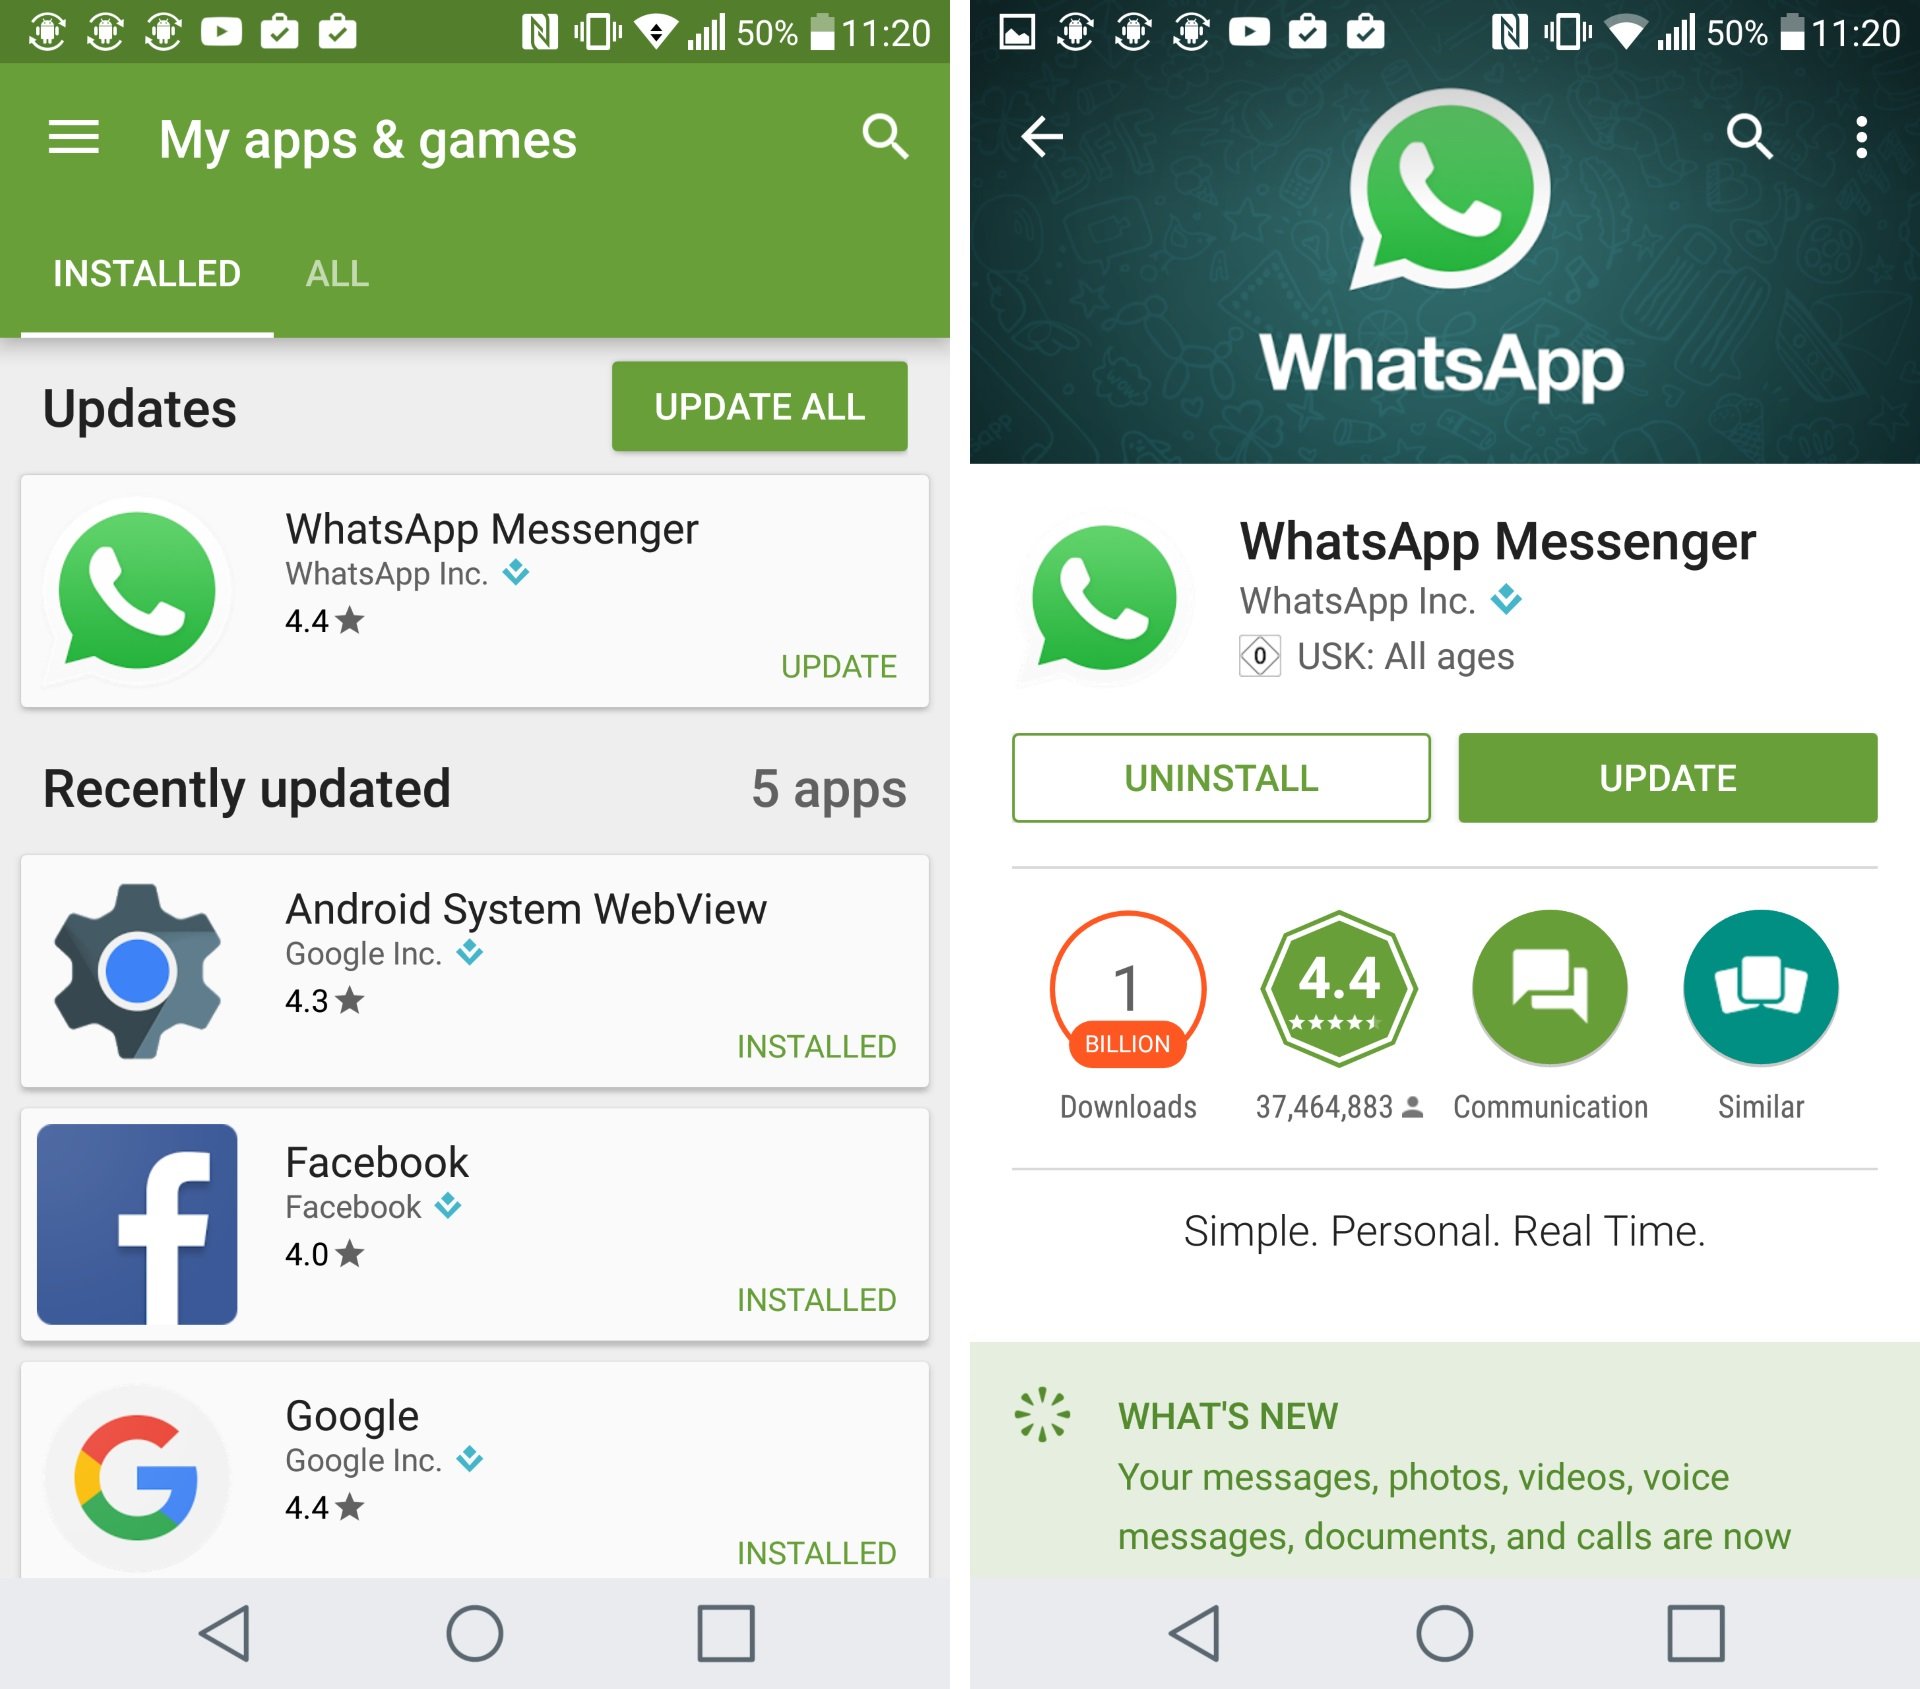 Update WhatsApp So you always have the latest version